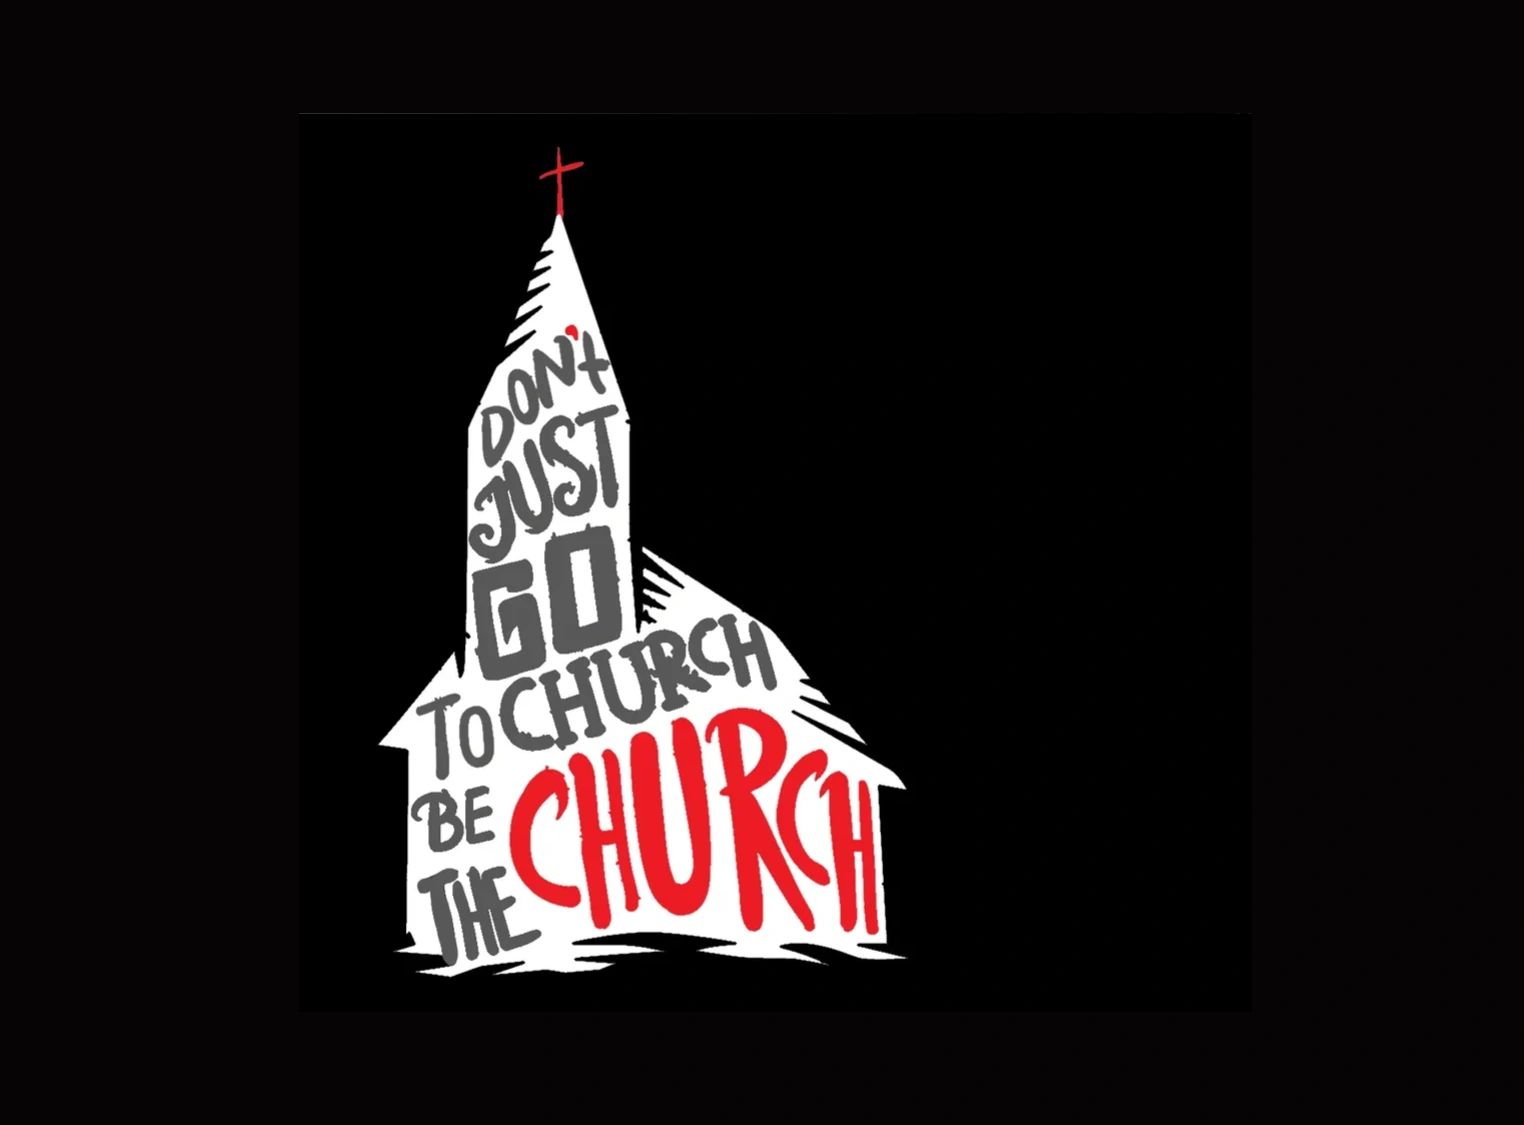 Don't just go to church, be the Church!